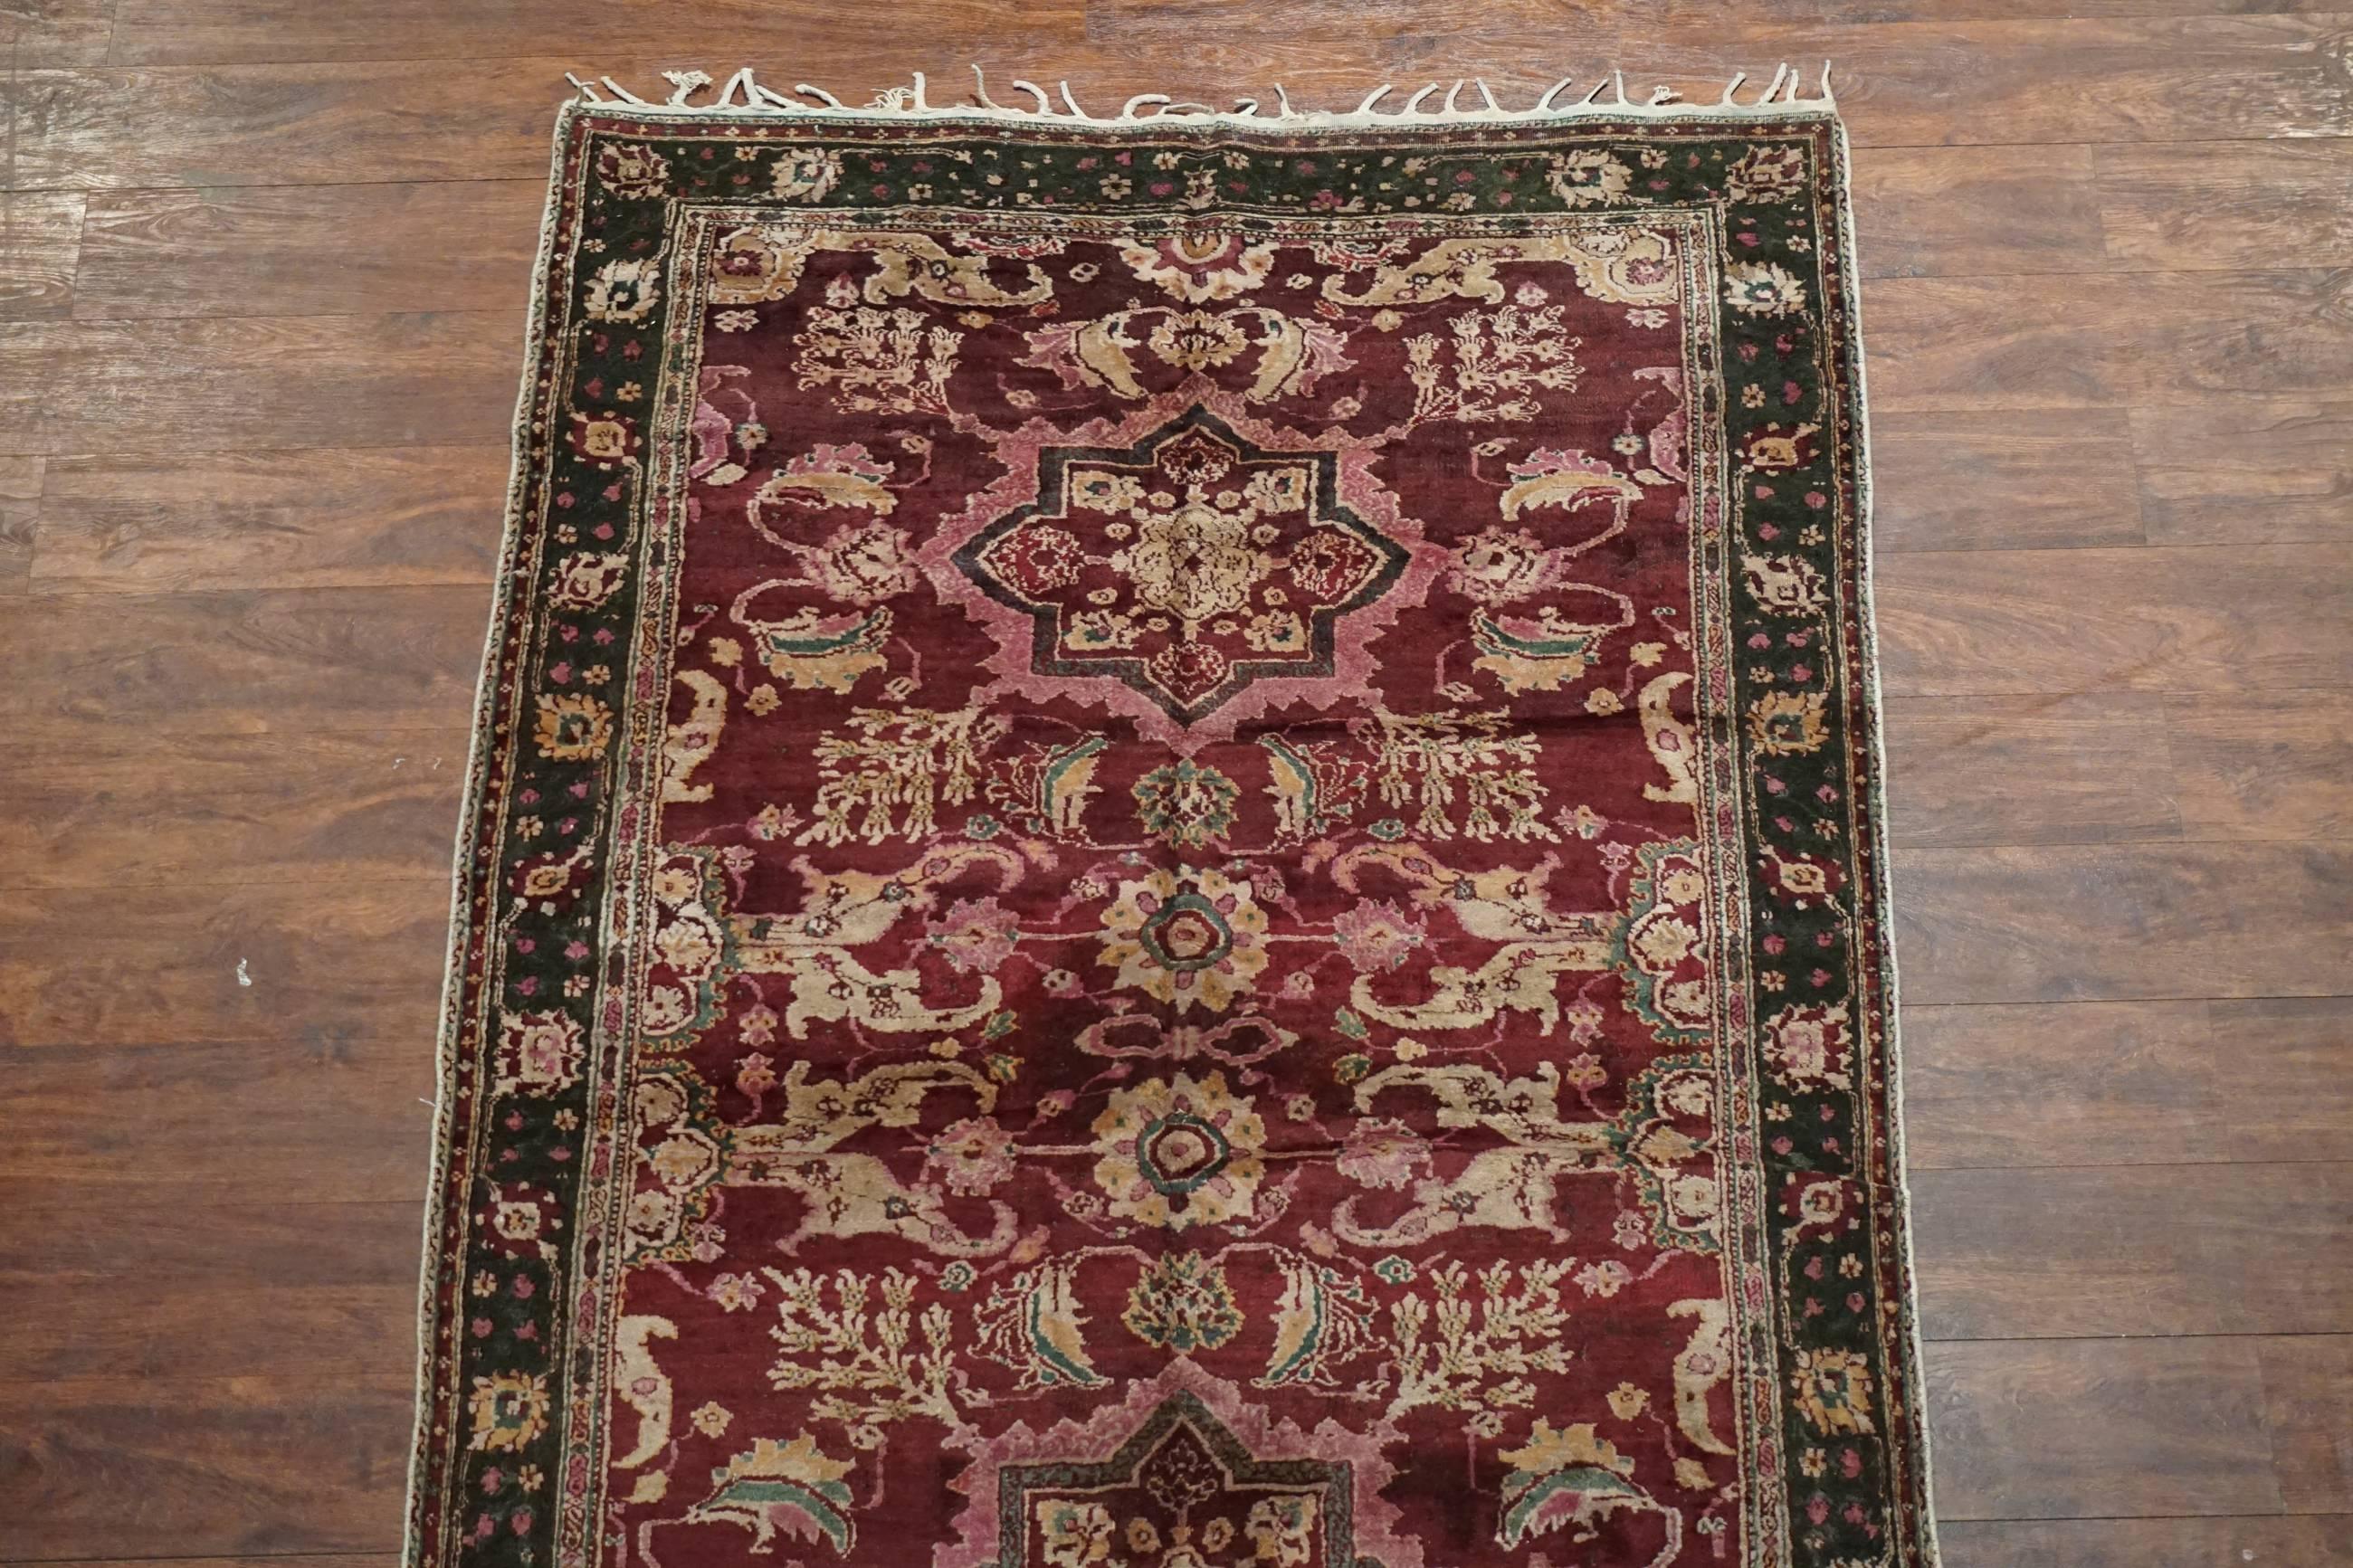 Antique Indian Agra Rug, circa 1900 In Excellent Condition For Sale In Northridge, CA